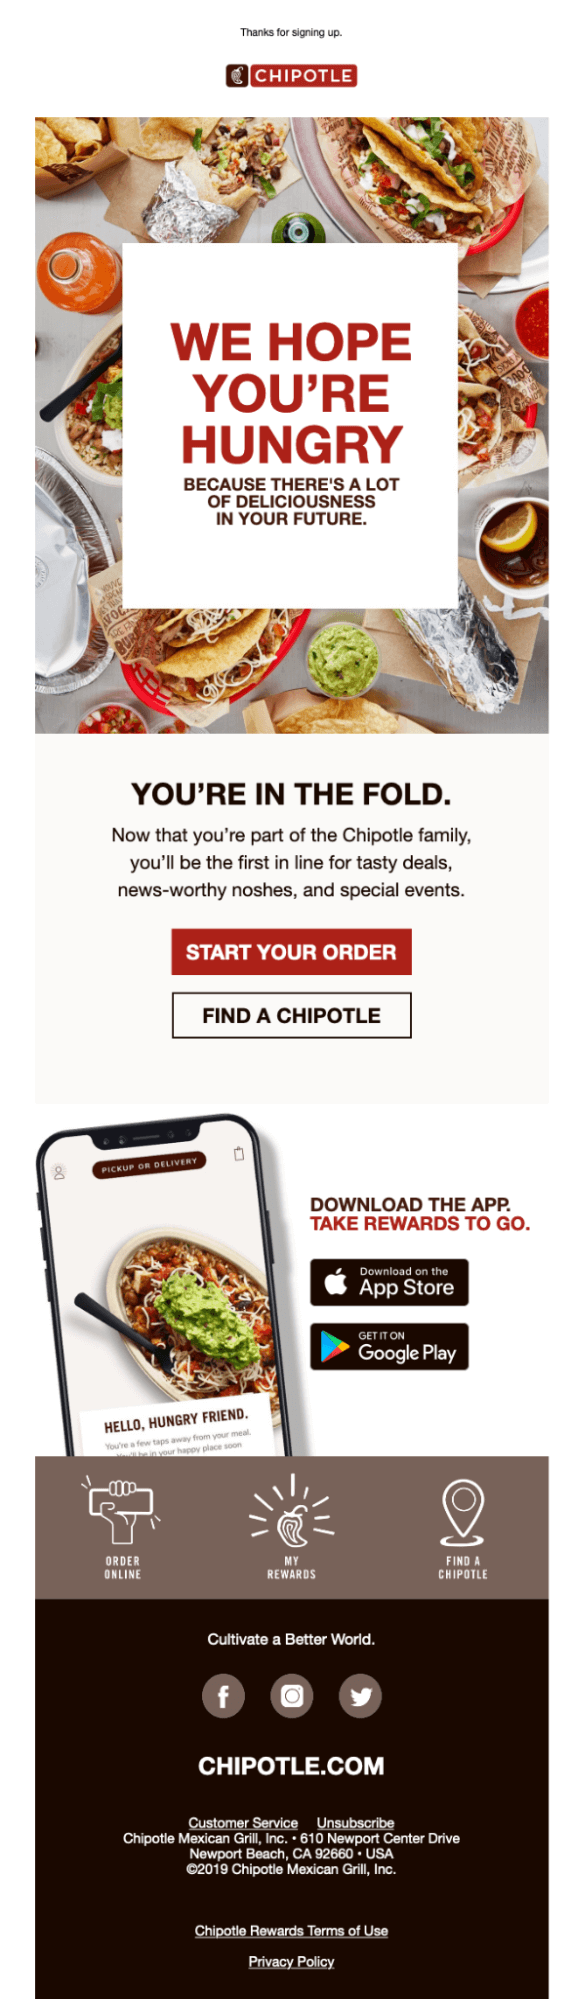 email example by Chipotle